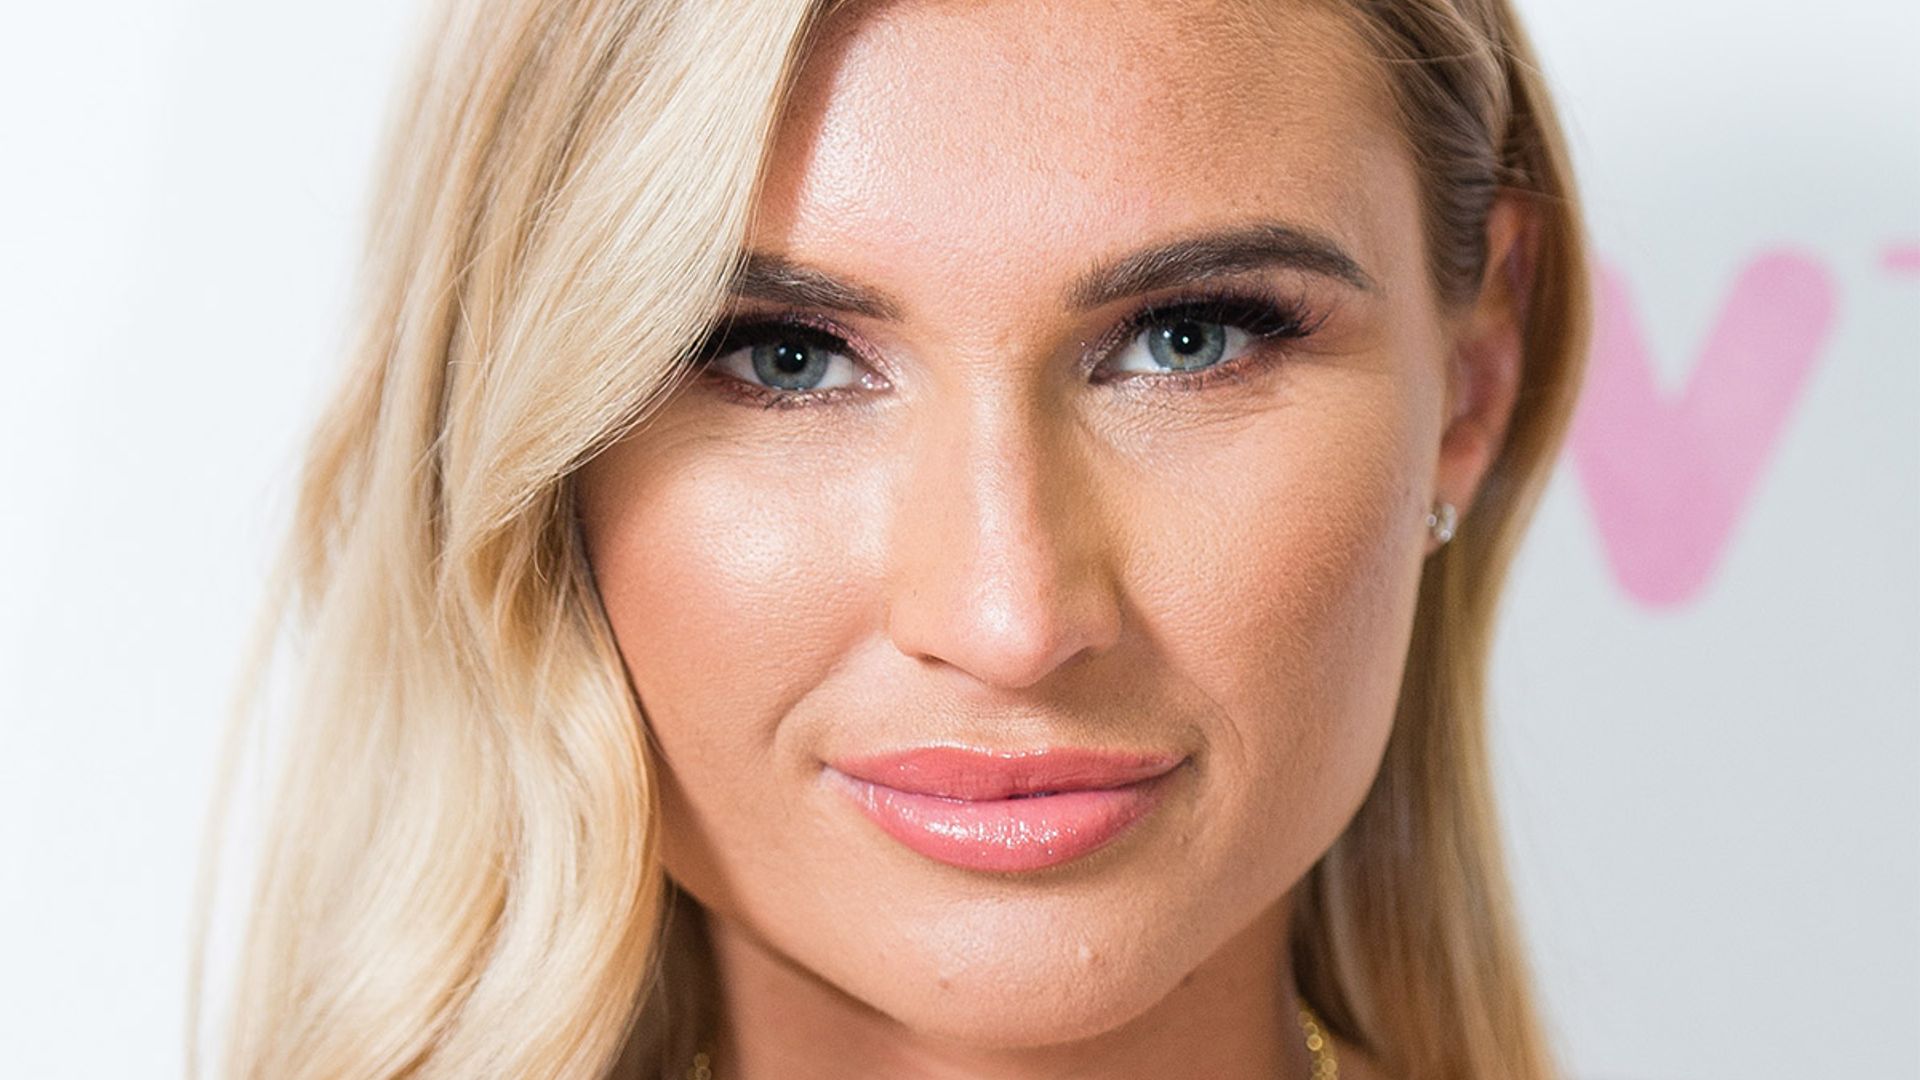 Billie Faiers' camouflage Topshop jacket is ideal for your spring wardrobe